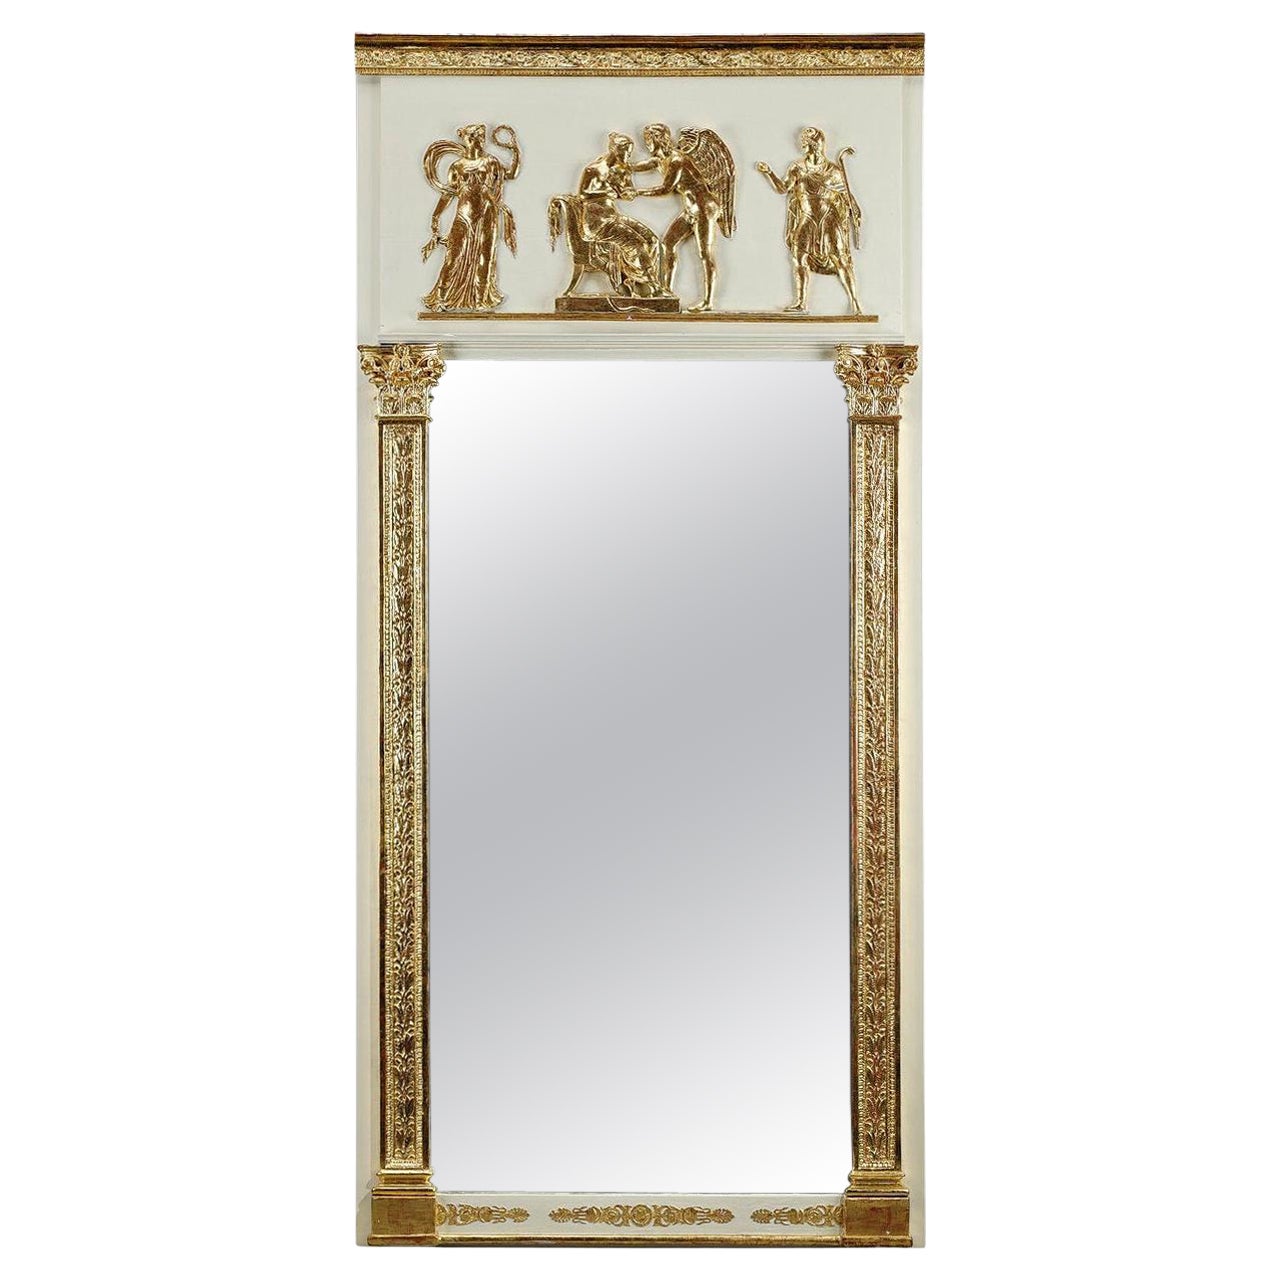 Wood and Gilded Stucco Overmantel Mirror, Empire Period, 19th Century For Sale